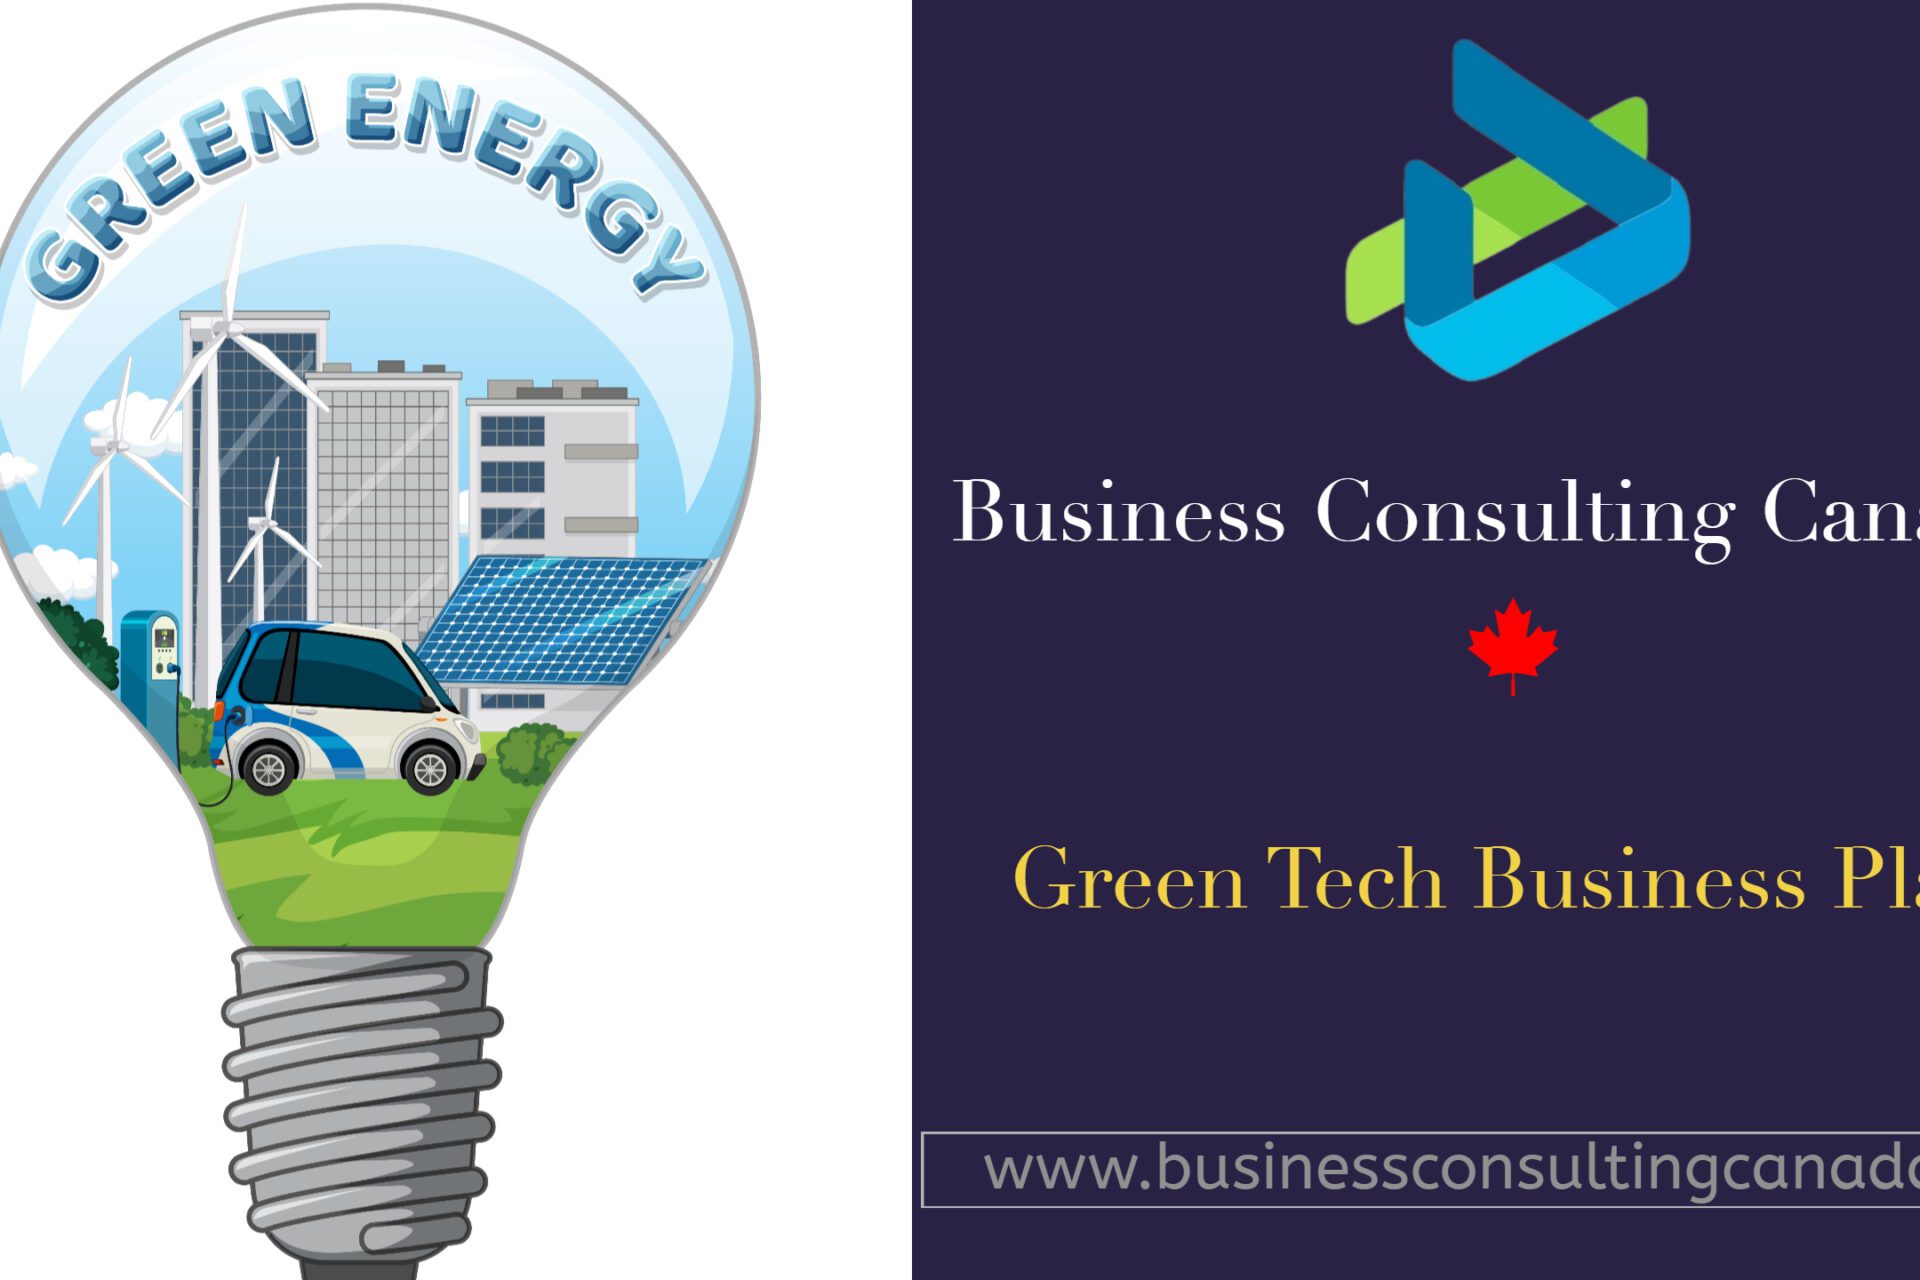 GreenTech Business Plan: #1 For Paving the Way to a Sustainable Perfect Future